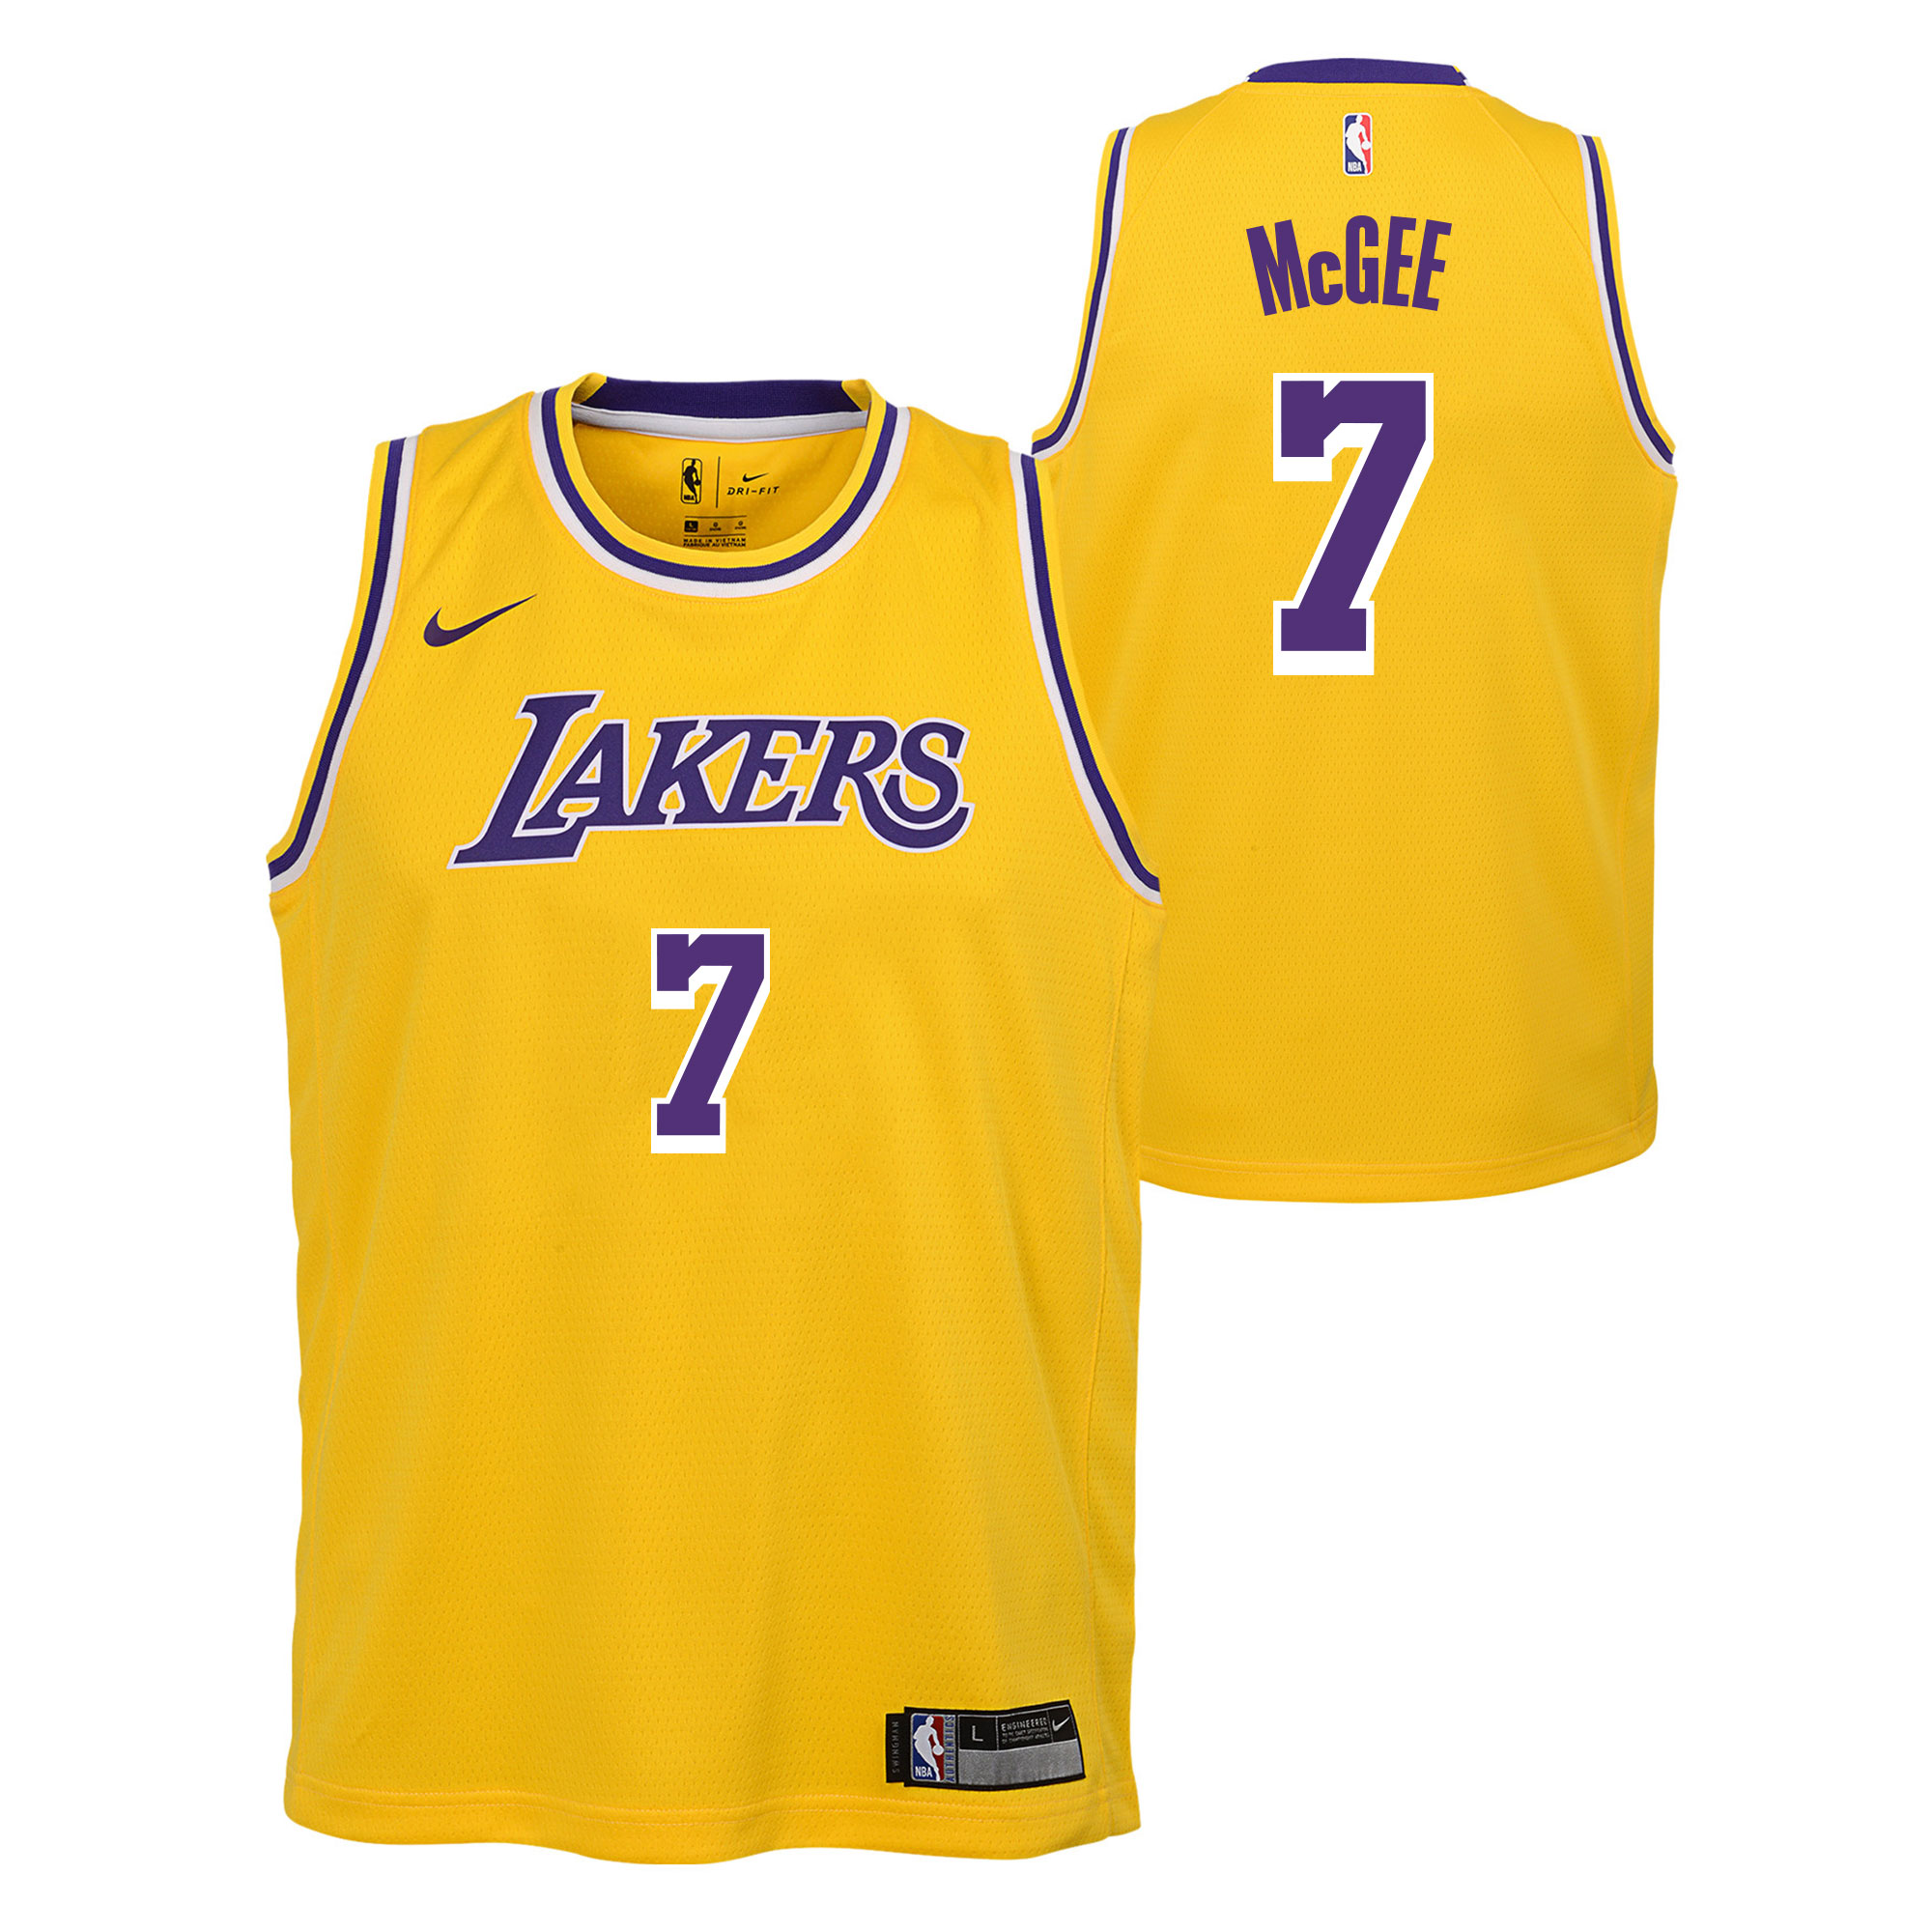 javale mcgee jersey number